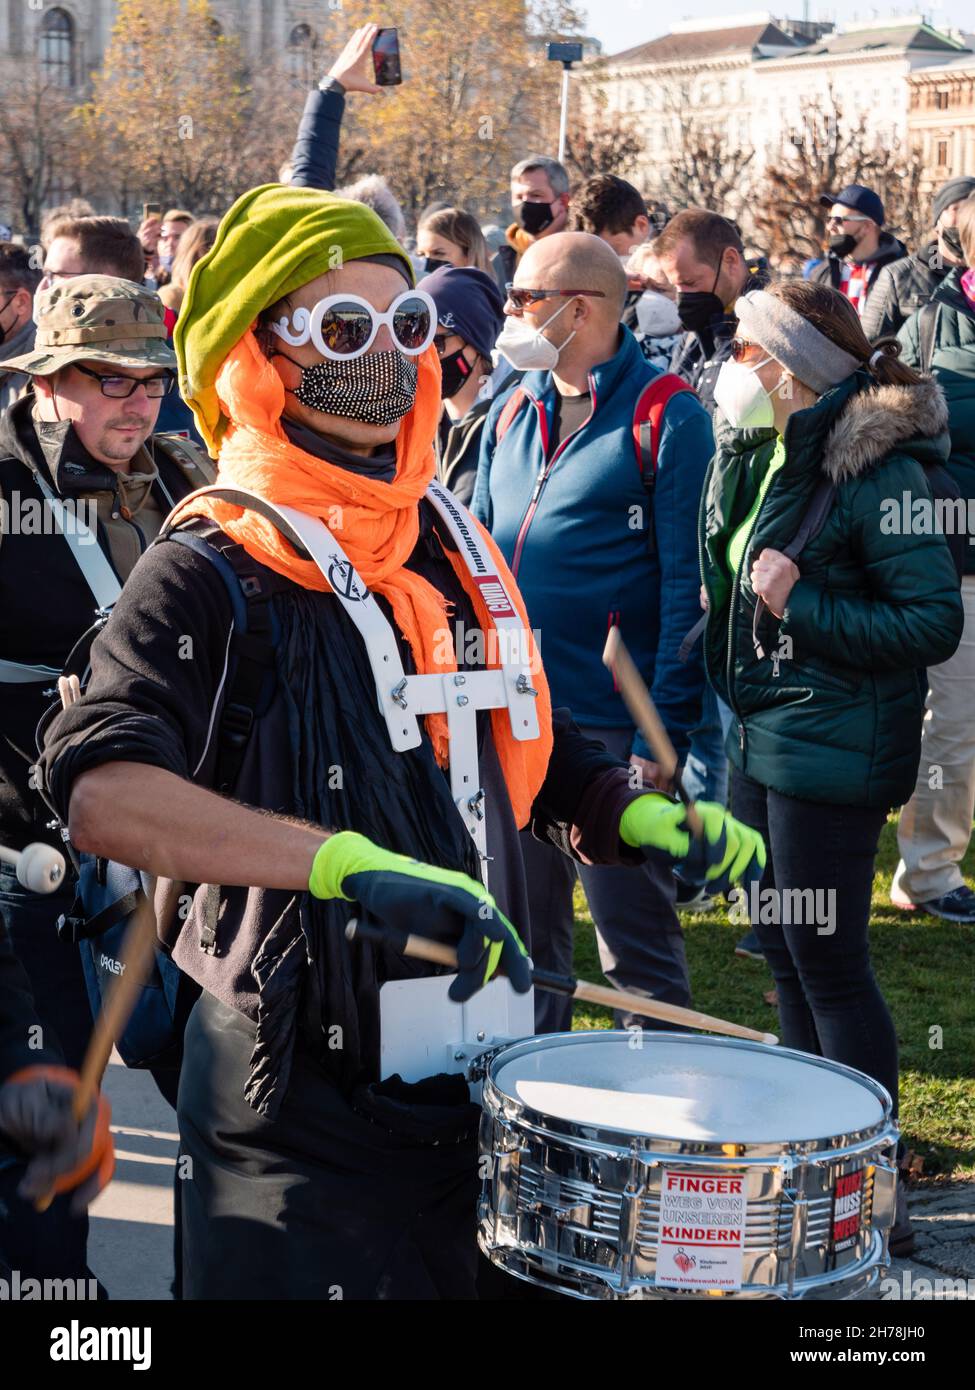 Vienna, Austria - November 20 2021: Covid-19 Demonstration Anti-Vaccination Protester and Drummer. Stock Photo